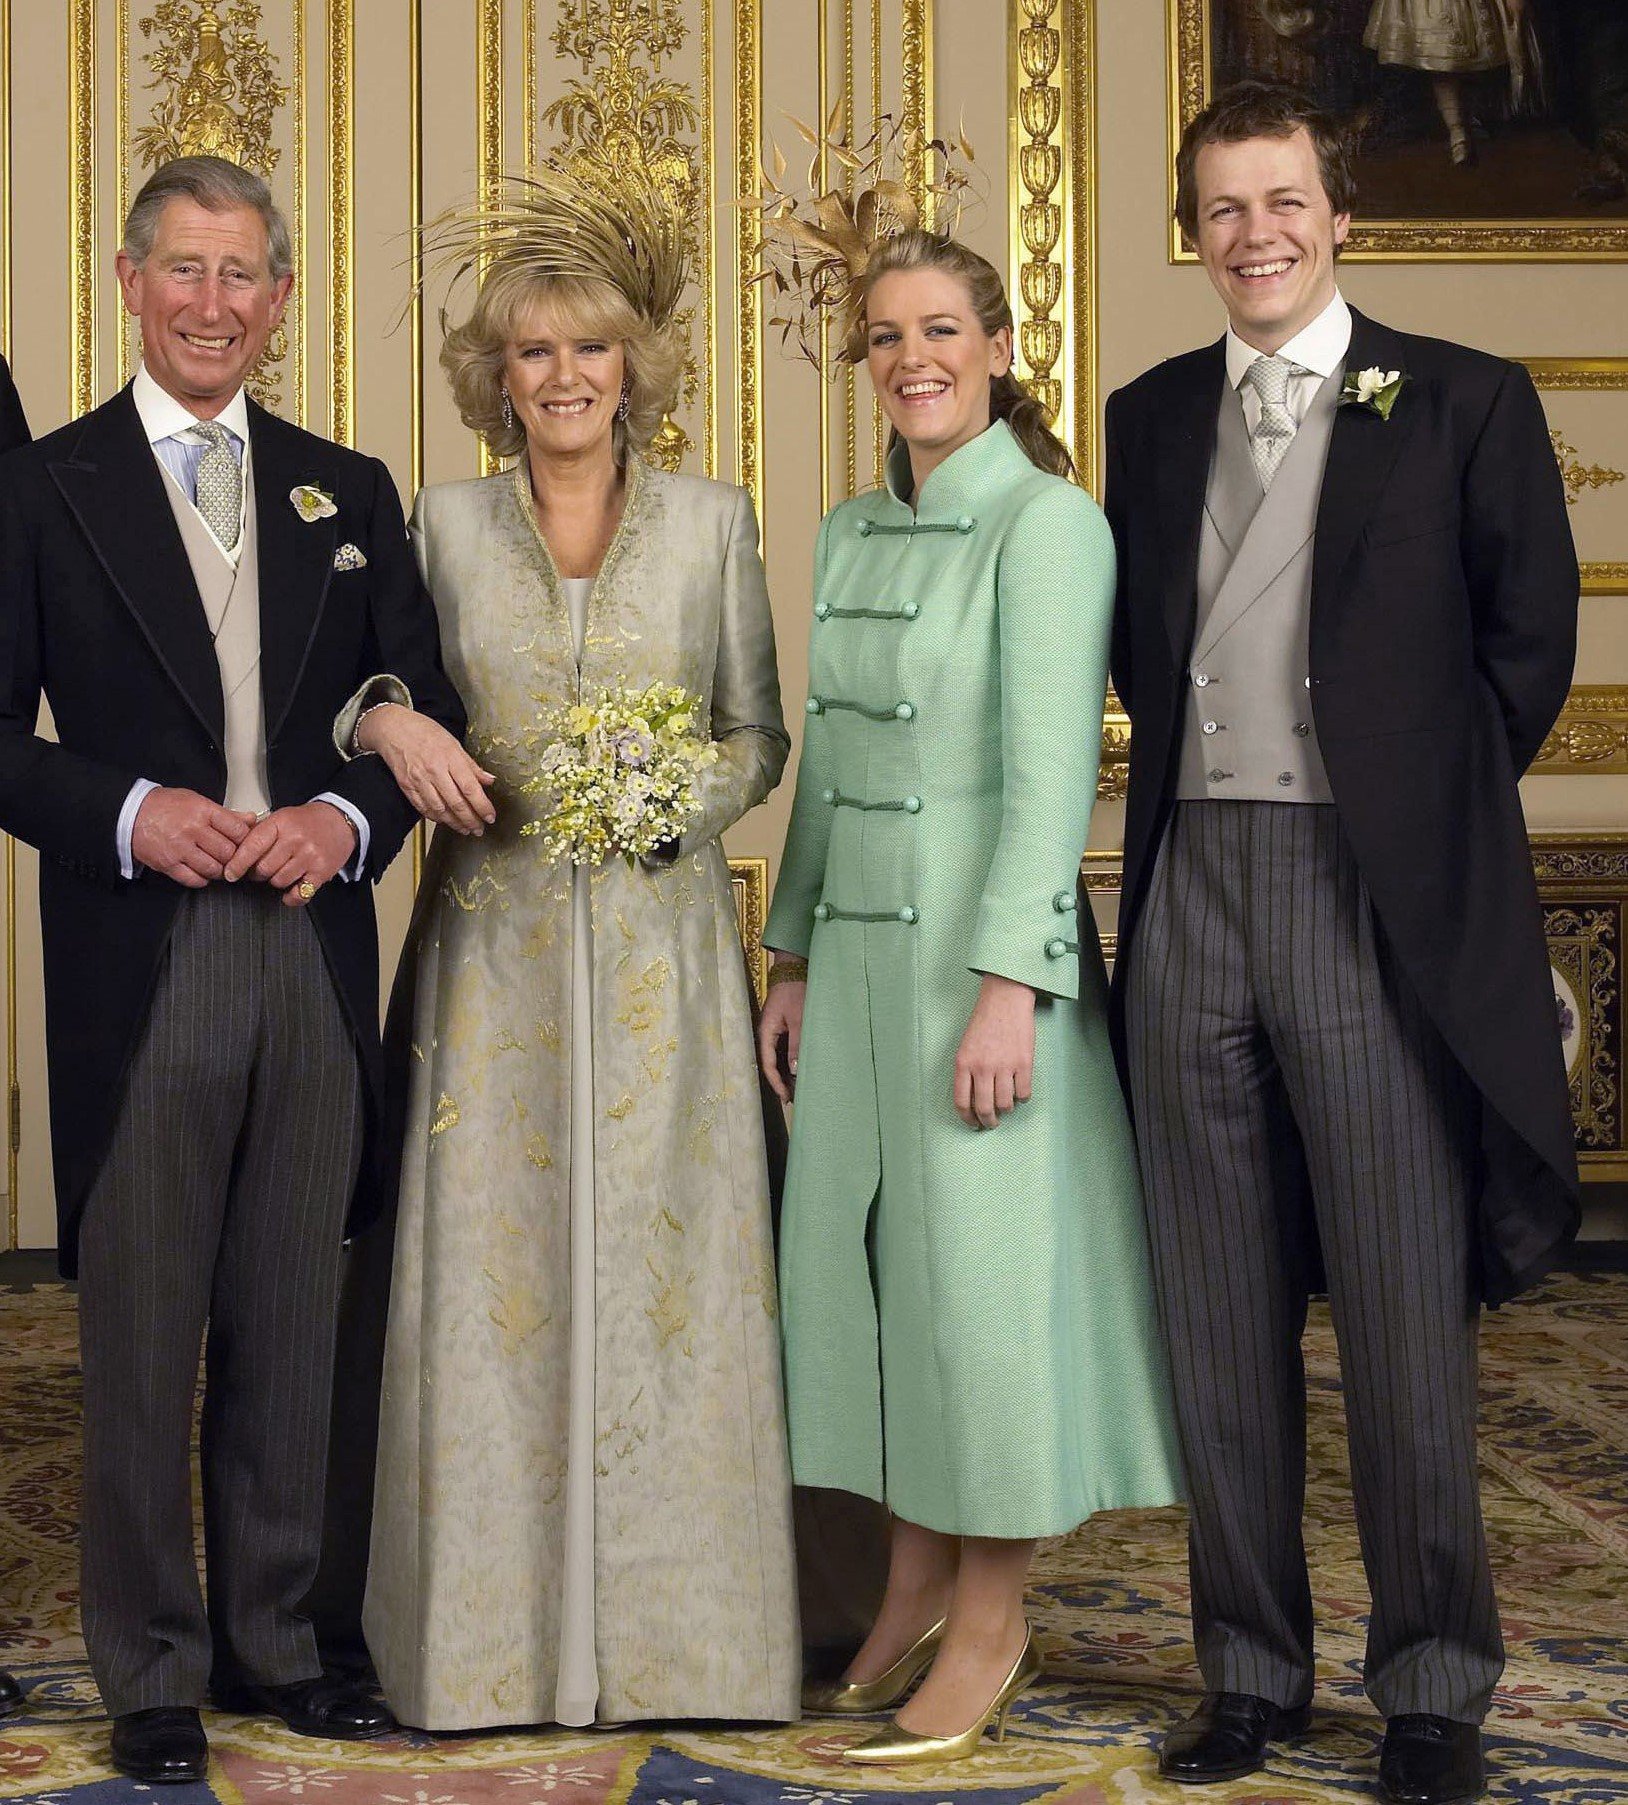 Prince Charles and Camilla Parker Bowles' wedding photo next to Camilla's son, Tom, and daughter, Laura